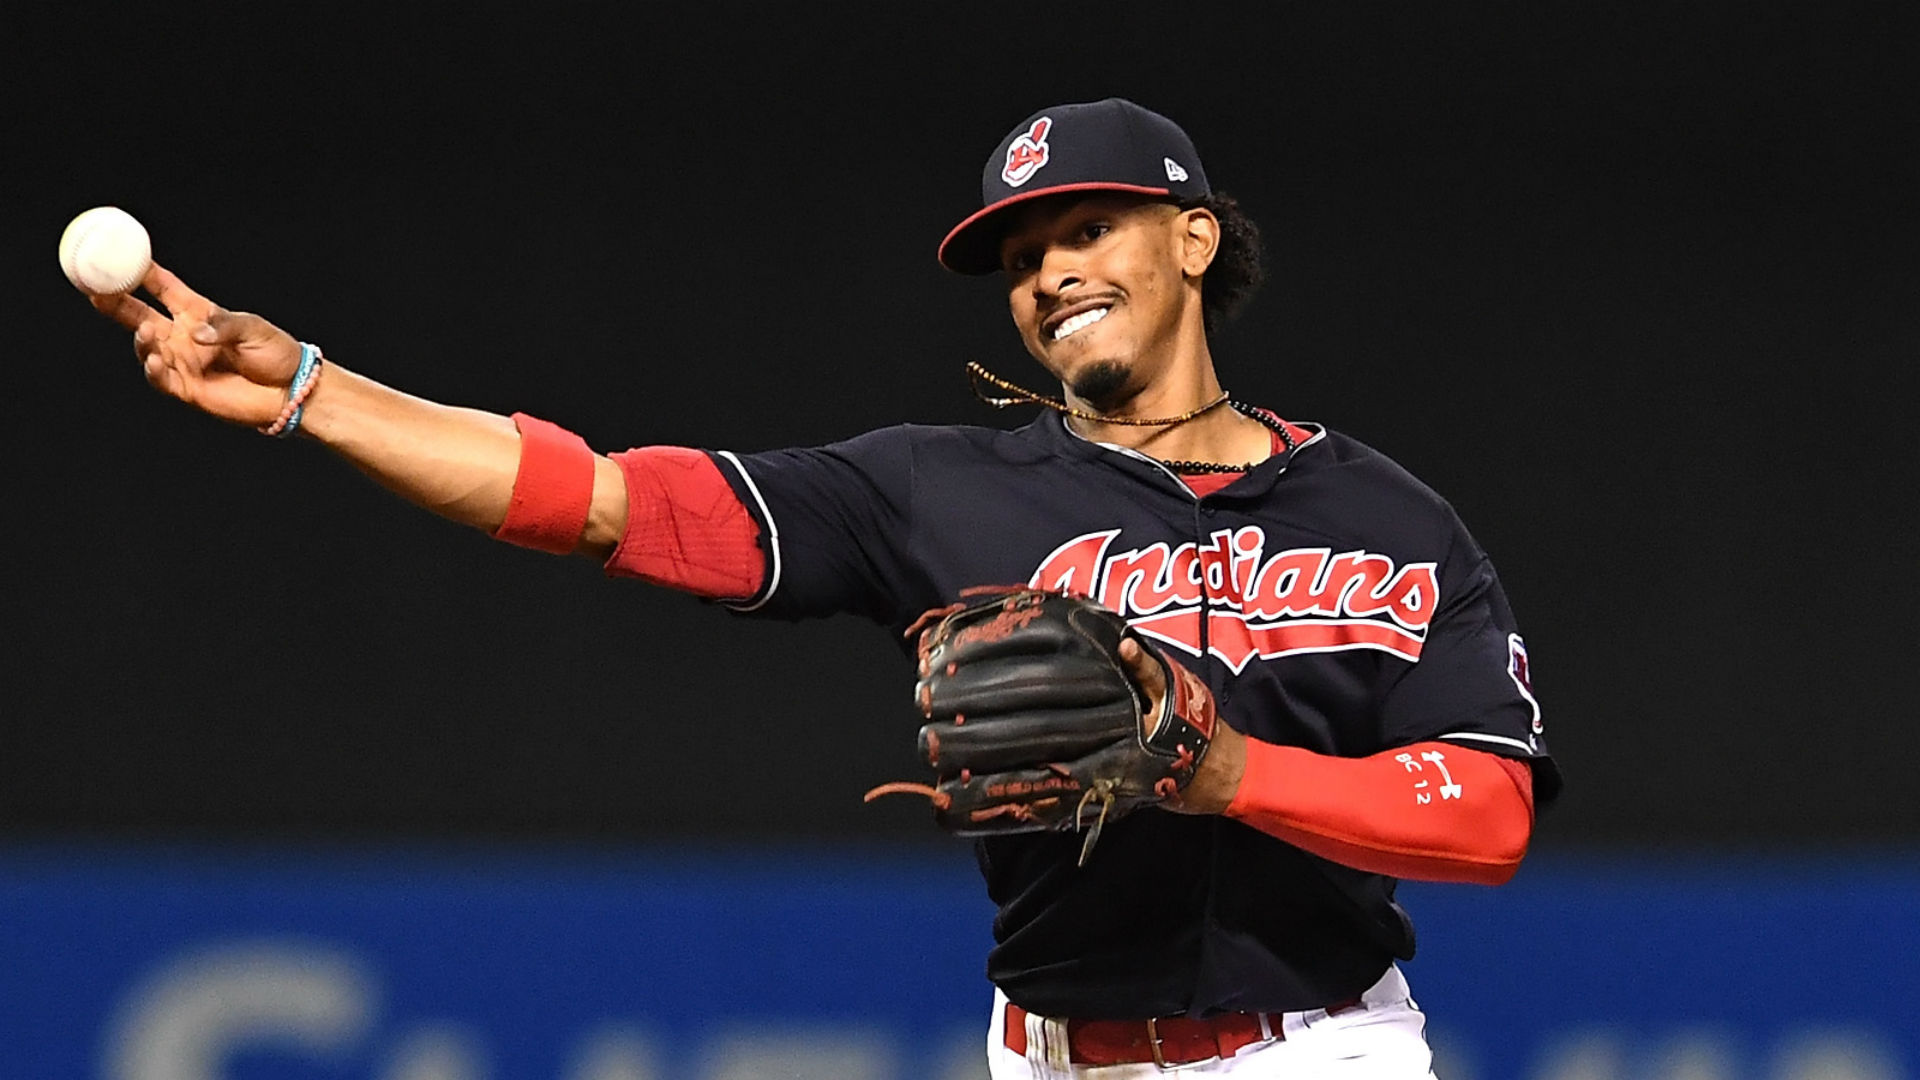 Lindor slashed .277/.352/.519 with 38 home runs and 92 RBIs last season on a bargain salary of $623,200.